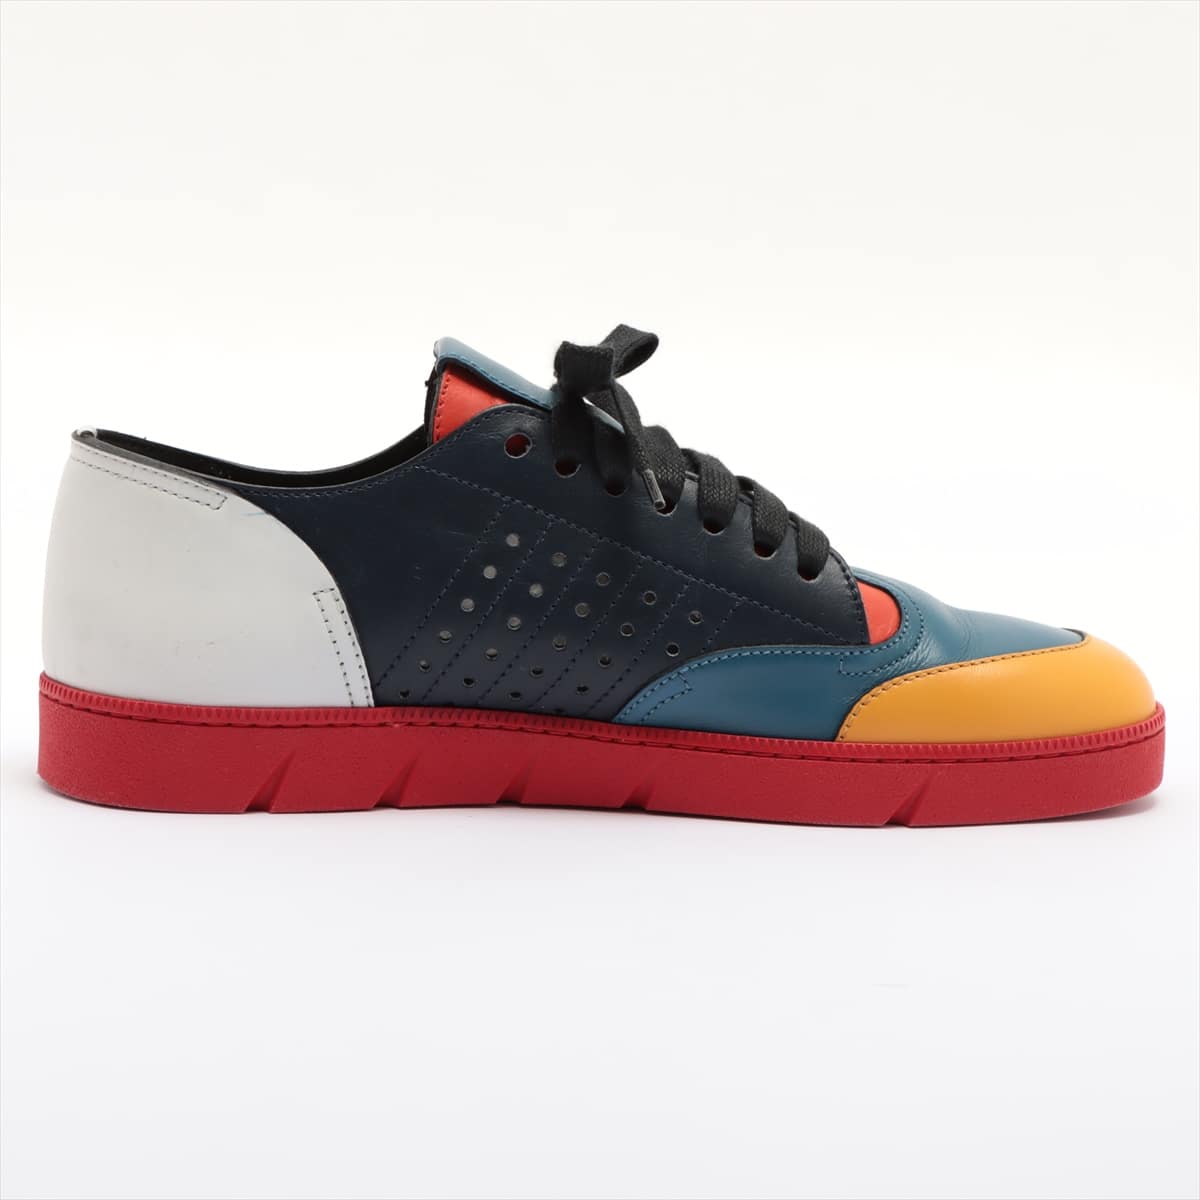 Loewe Leather Sneakers 42 Men's Multicolor There are cigarette extinguishing marks